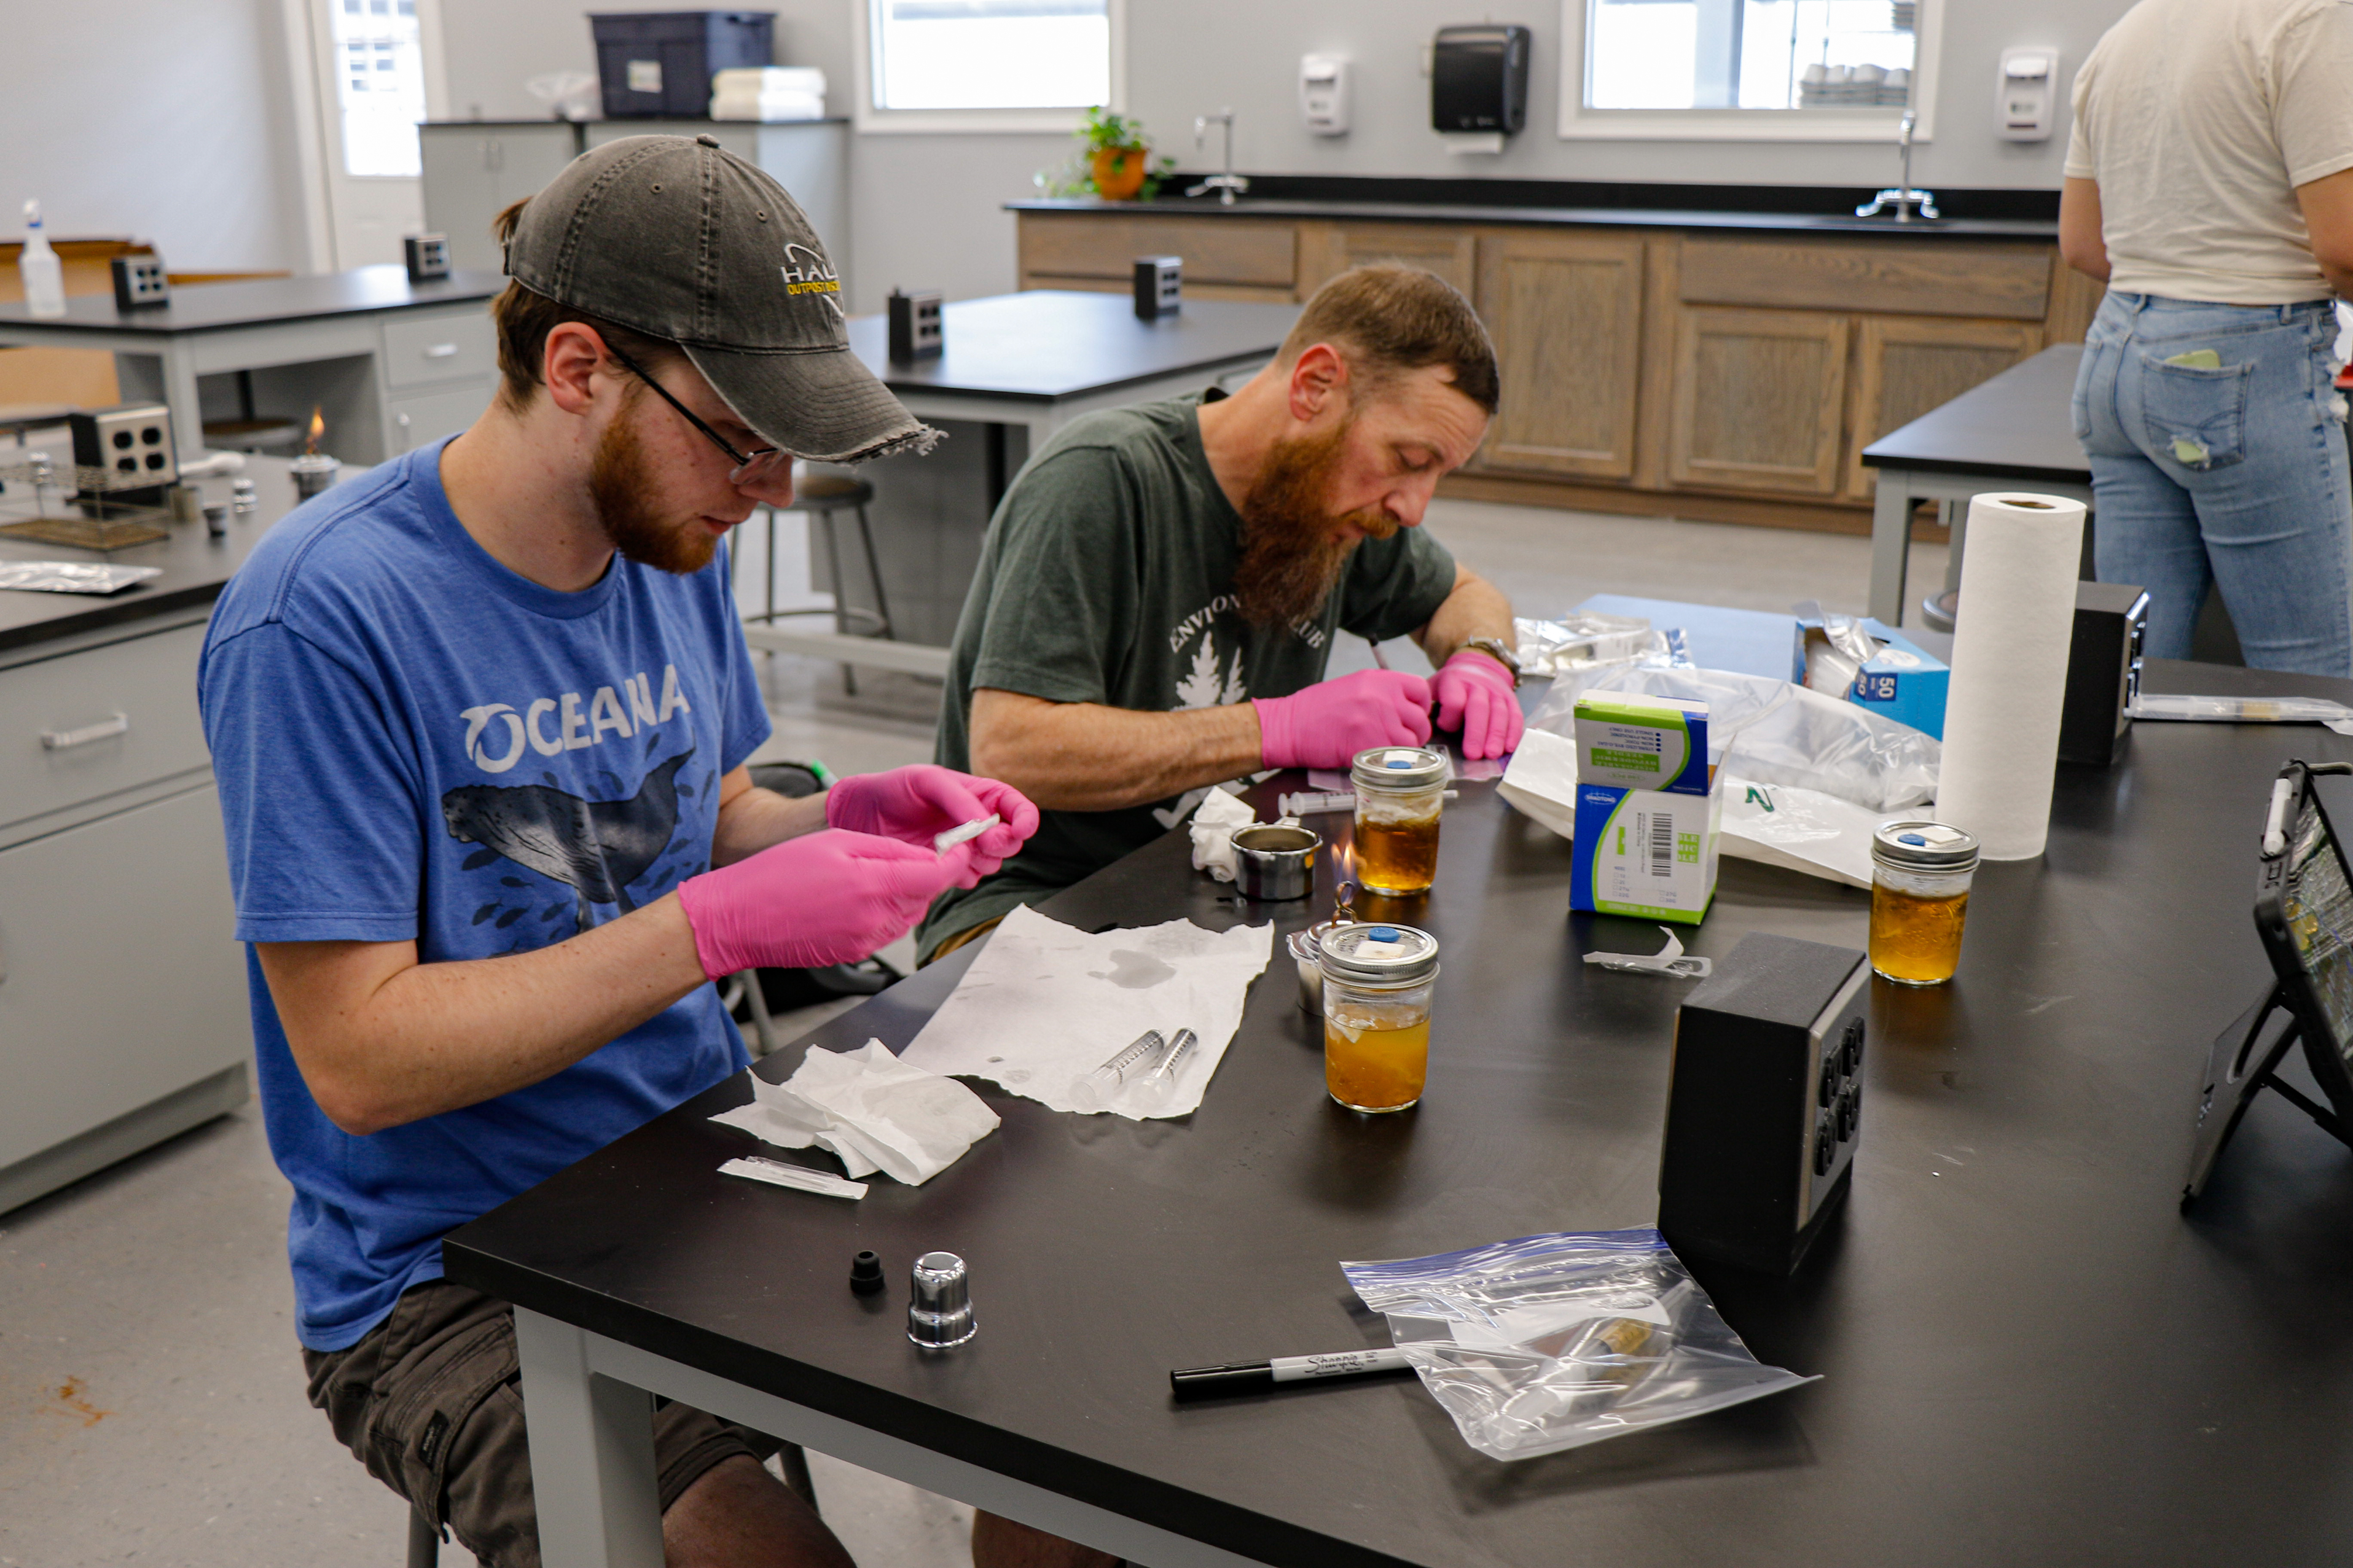 Two students working on a lab assignment.